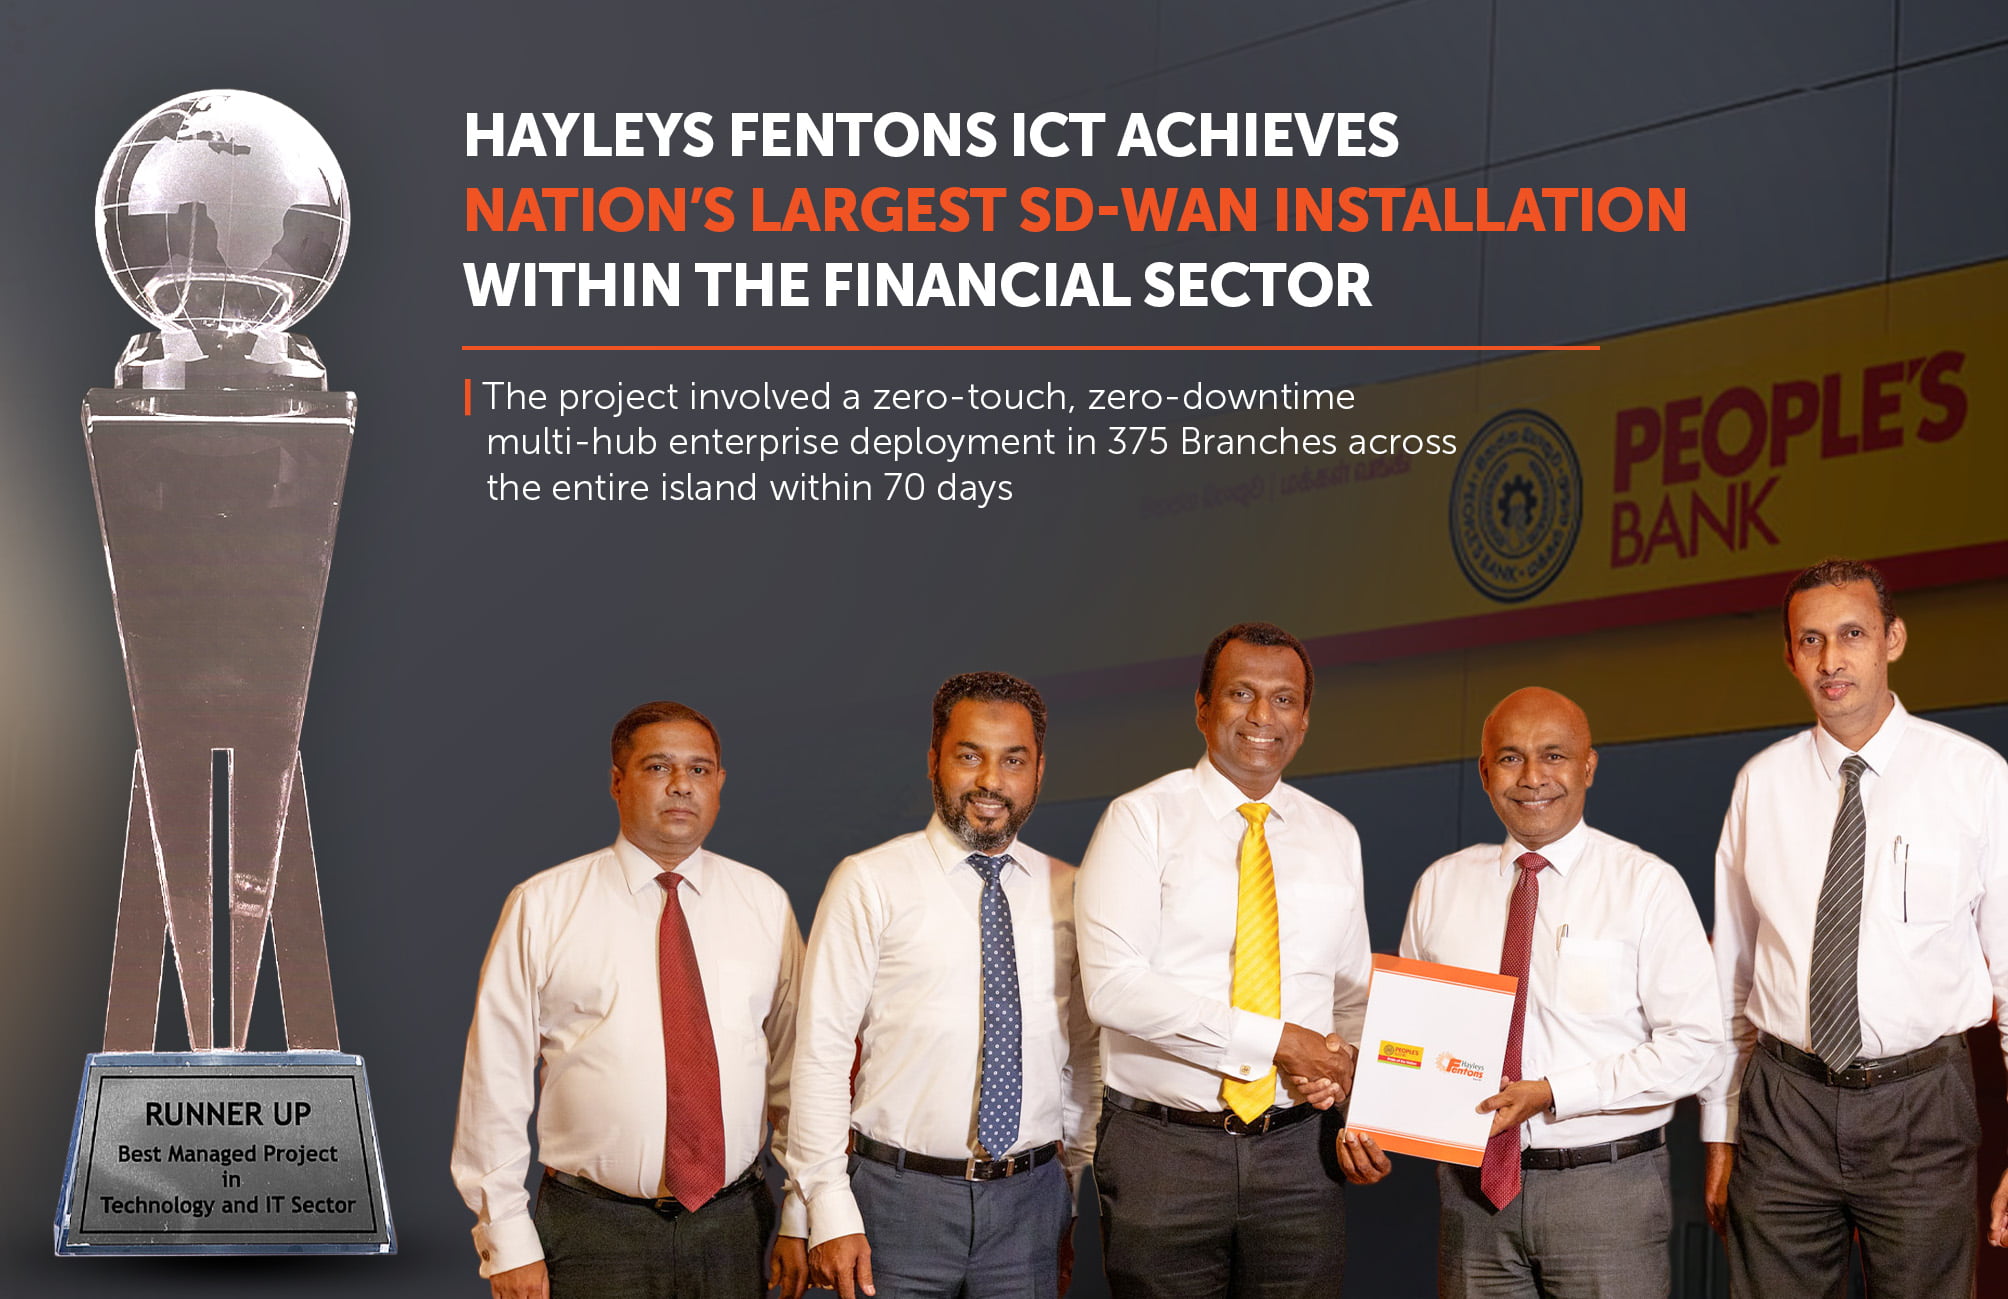 Hayleys Fentons ICT achieve nation’s largest SD-WAN installation within financial sector